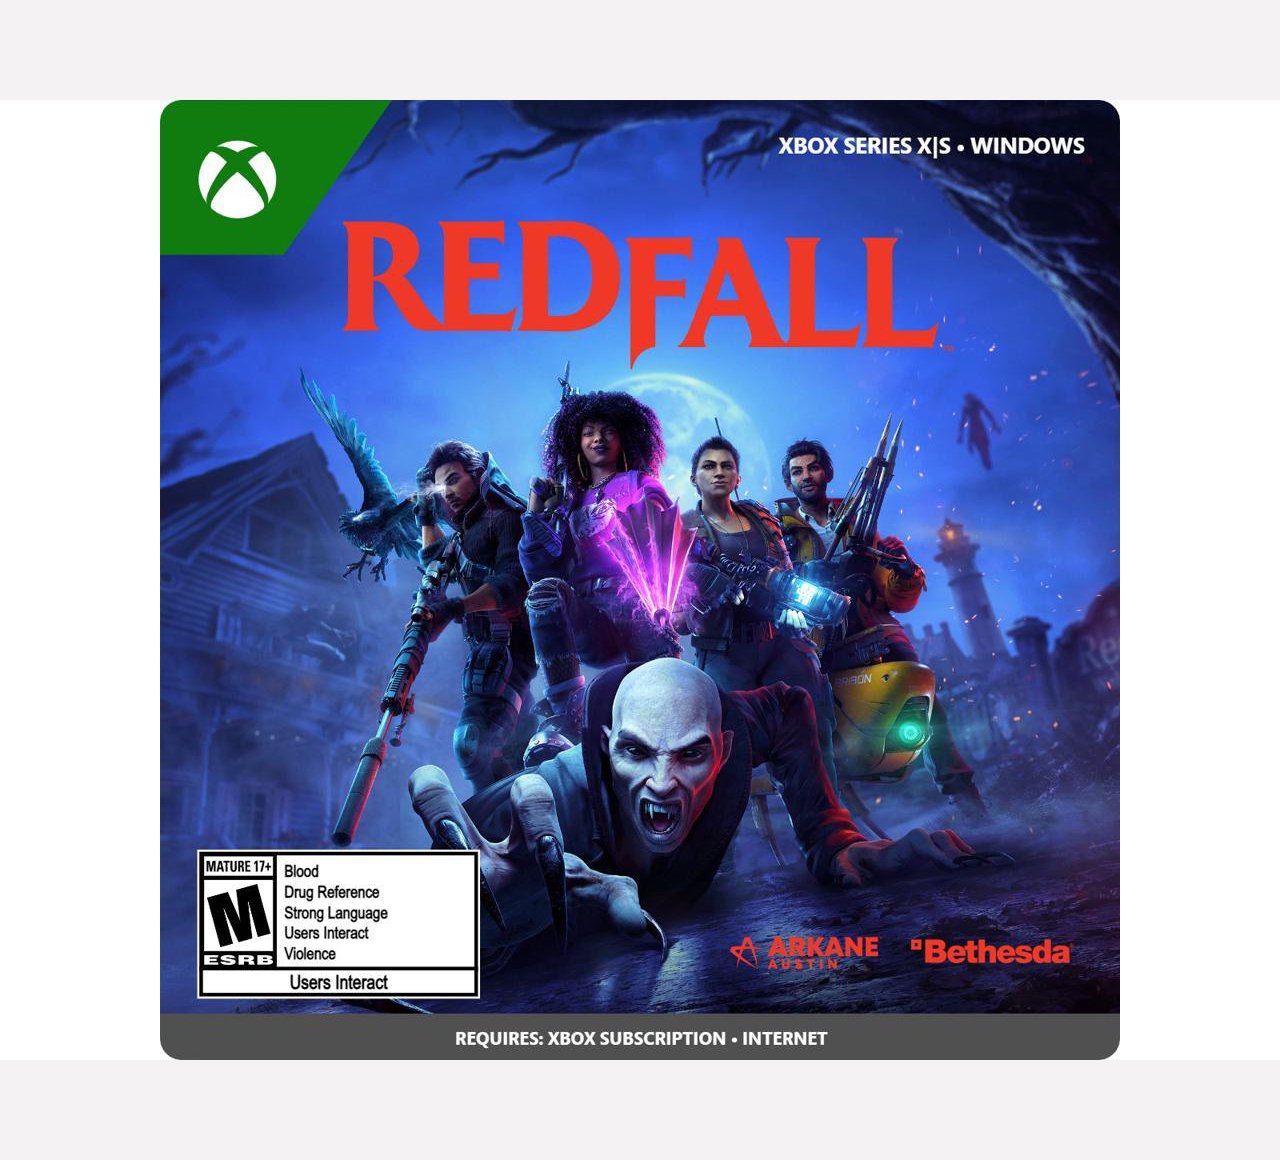 Redfall Support Cross-Play Between Xbox Series X